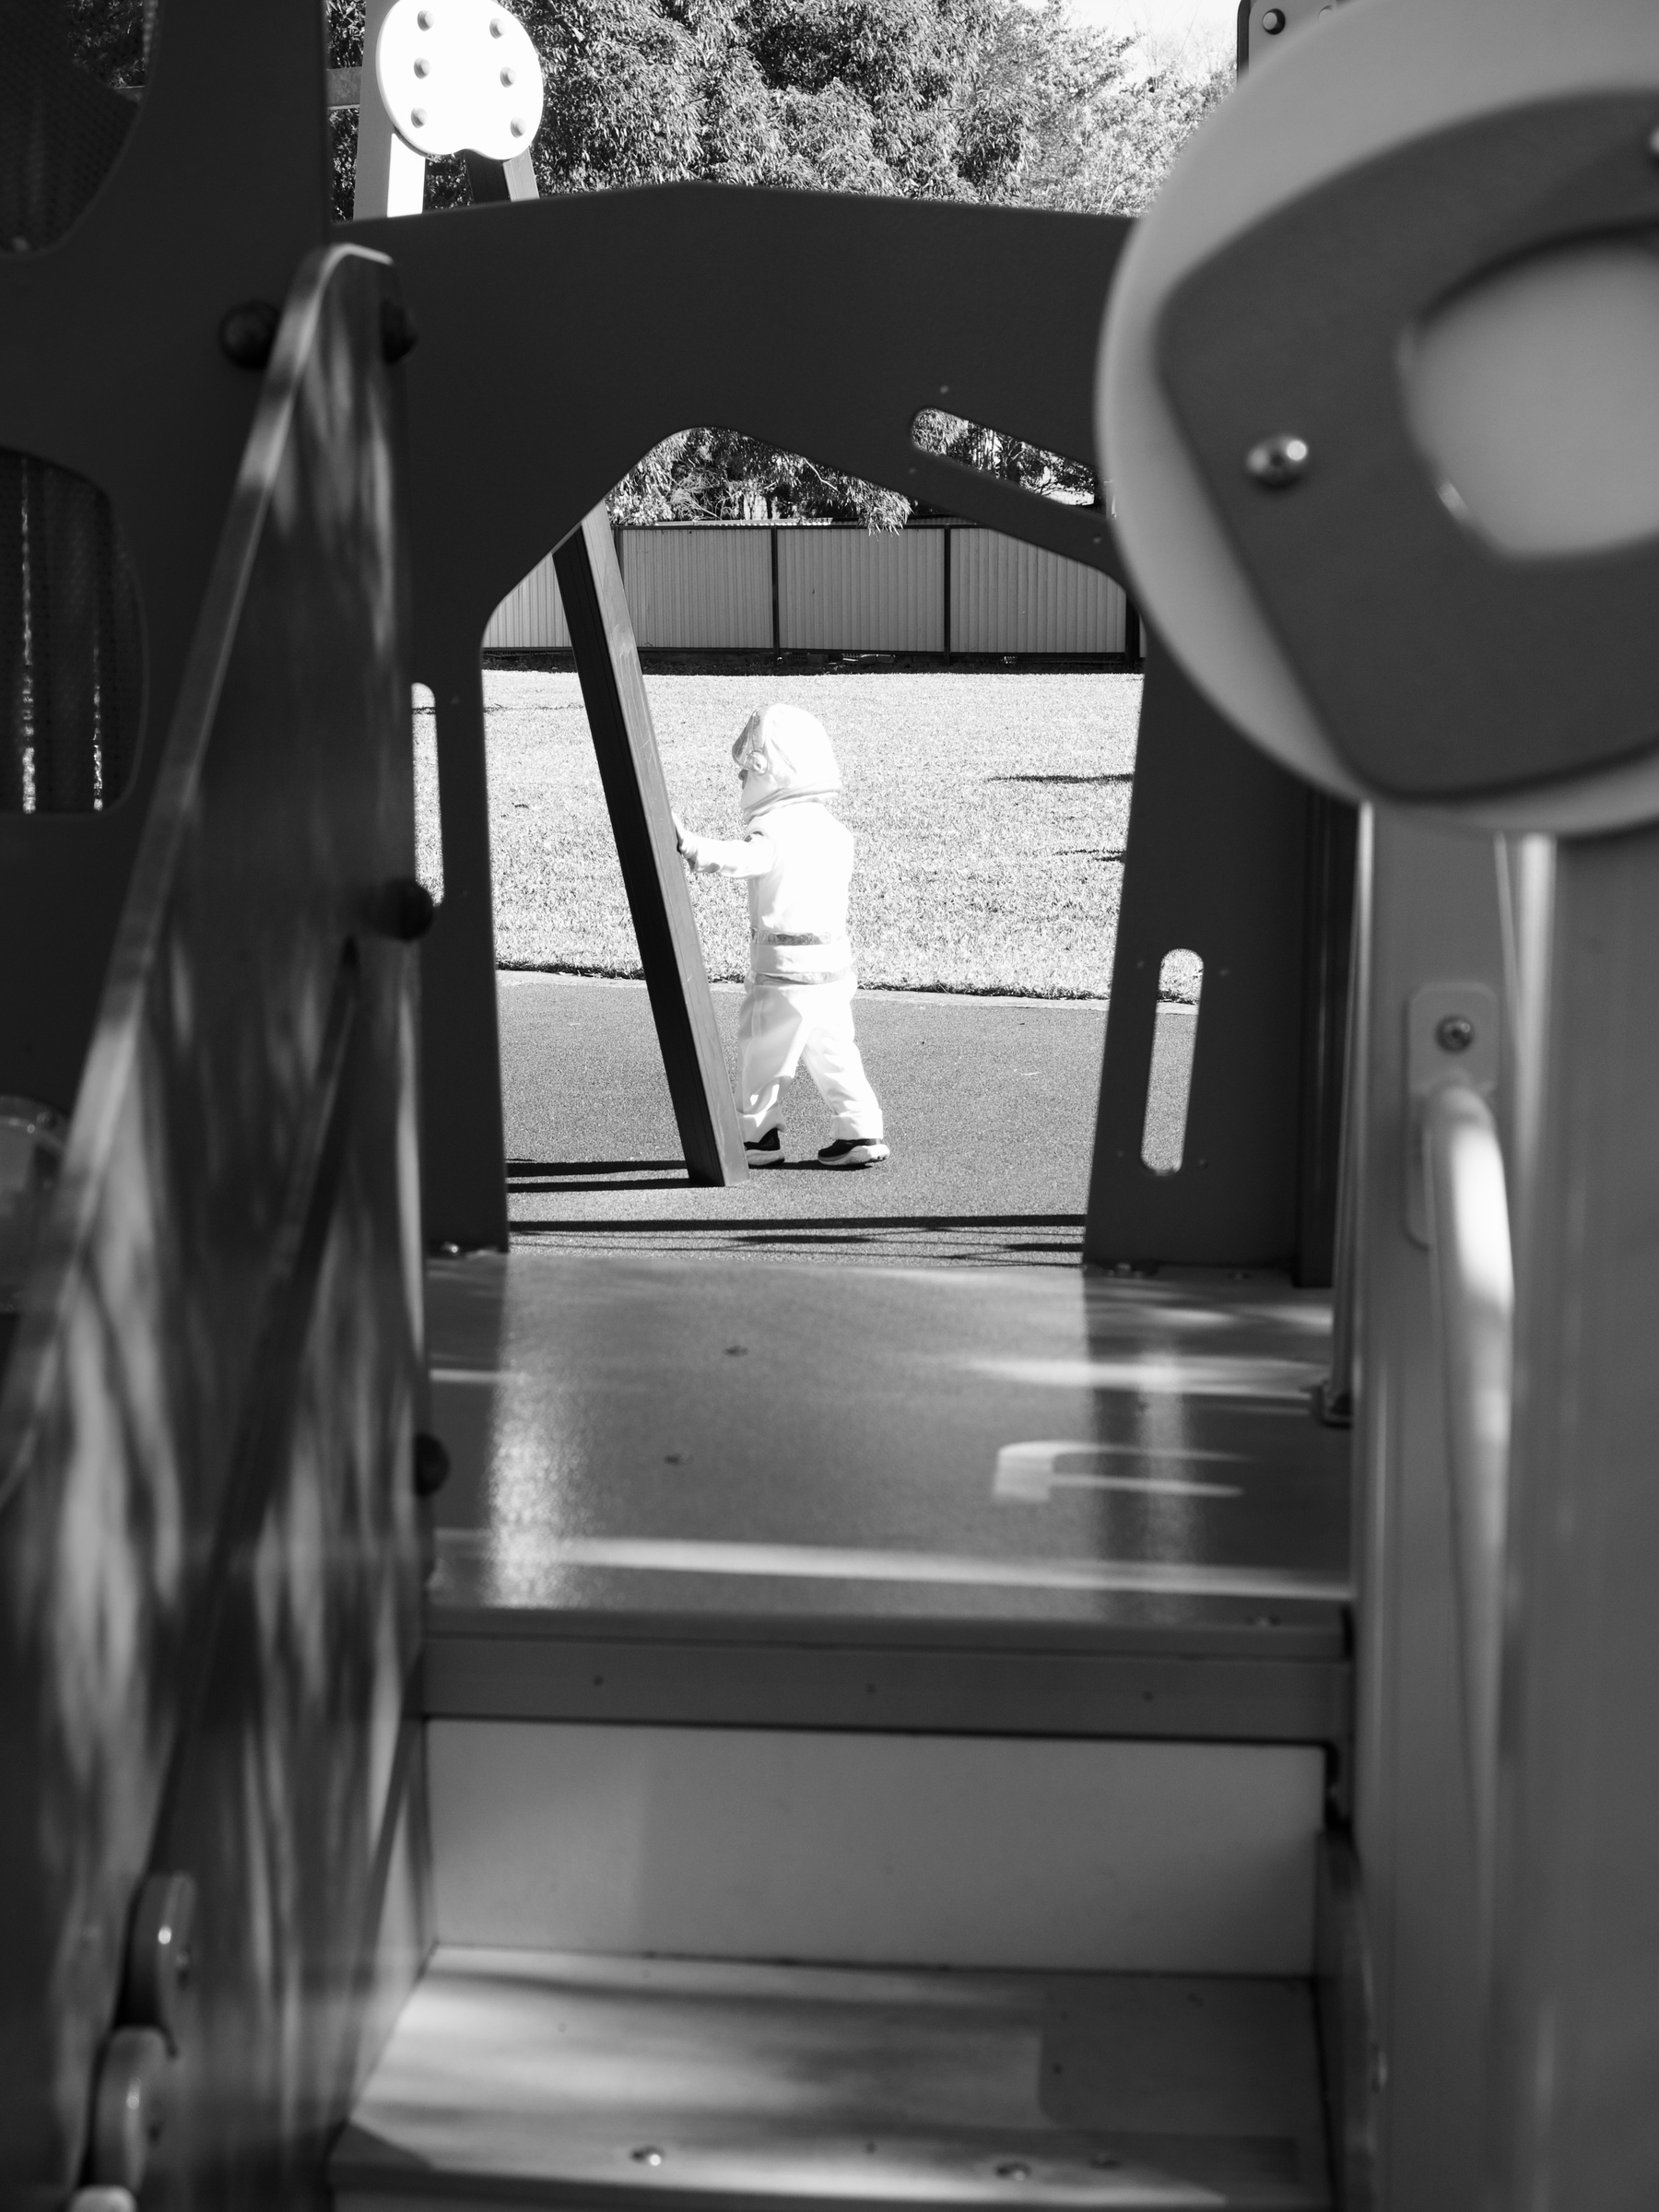 A black-and-white image, looking through play equipment at a young boy in an astronaut costume walking through a park